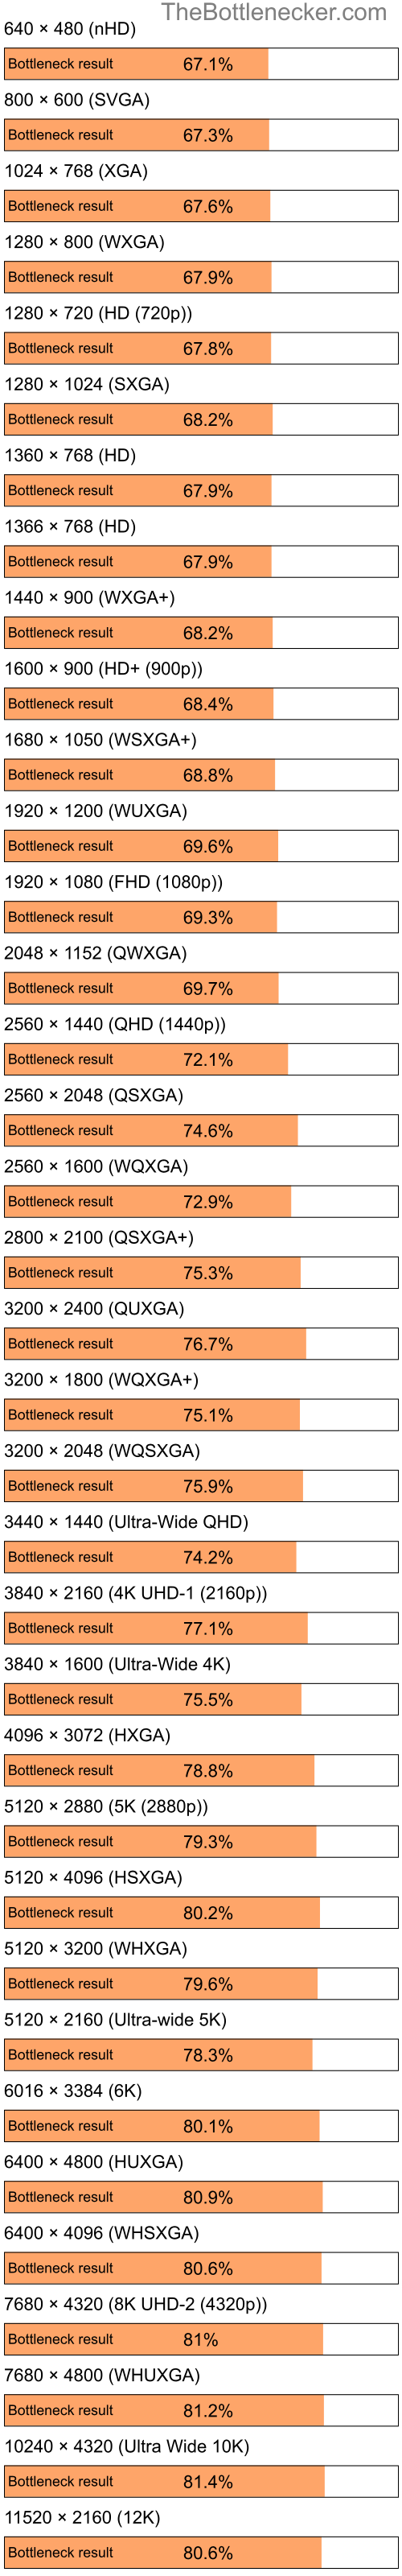 Bottleneck results by resolution for Intel Atom N280 and AMD Mobility Radeon HD 4200 in7 Days to Die